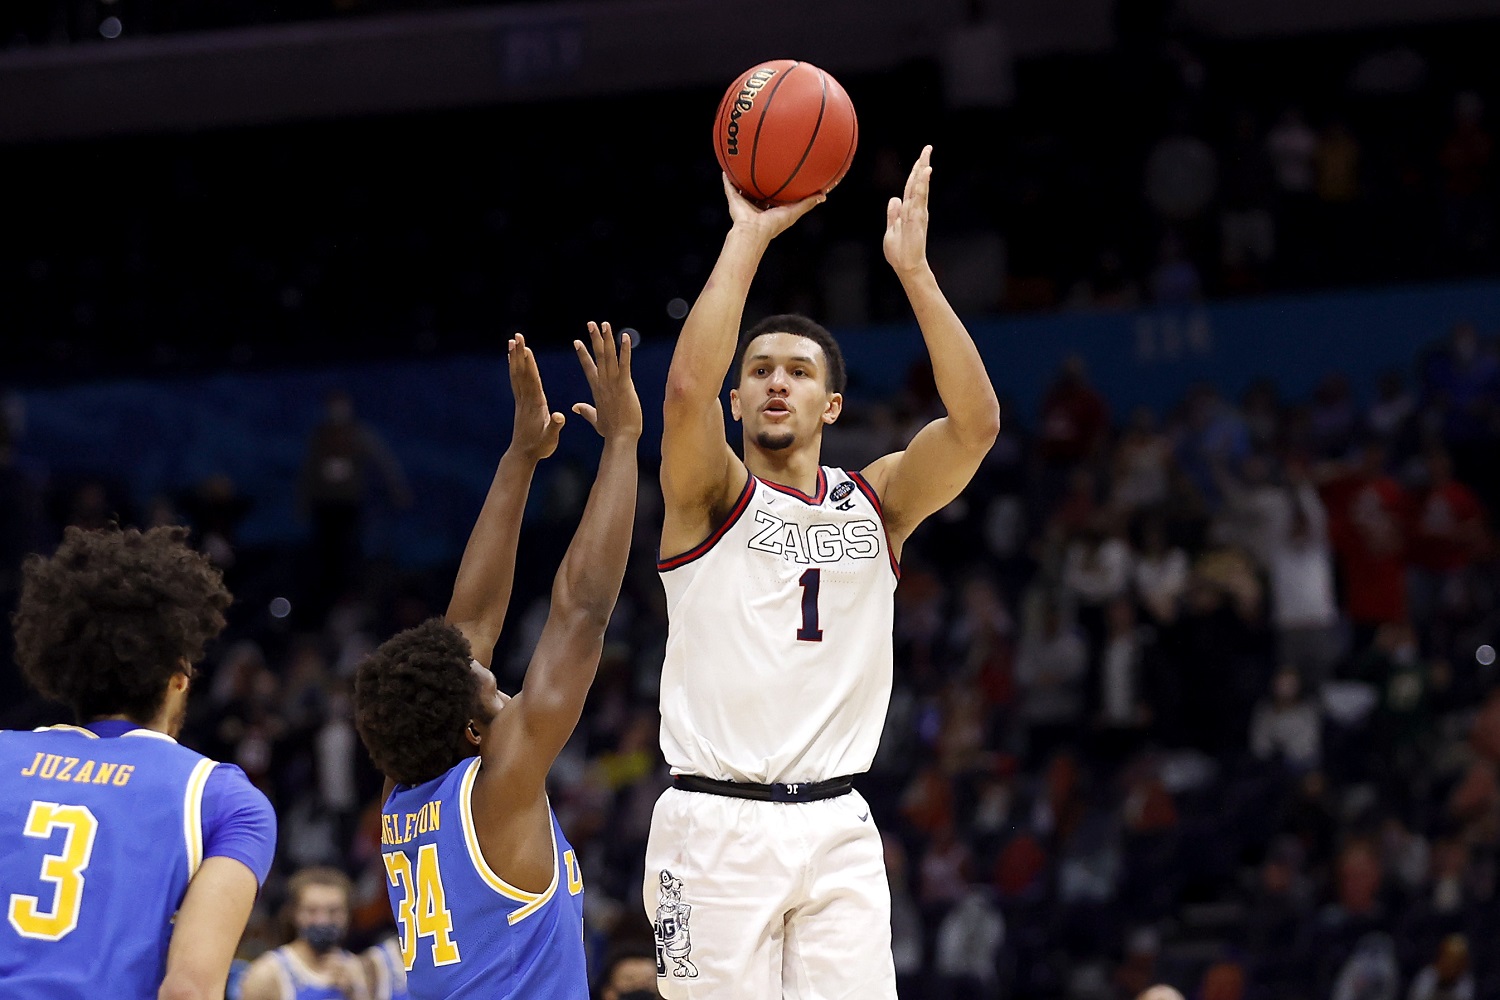 Gonzaga's Jalen Suggs drew inspiration from chat with UConn star Paige  Bueckers before win